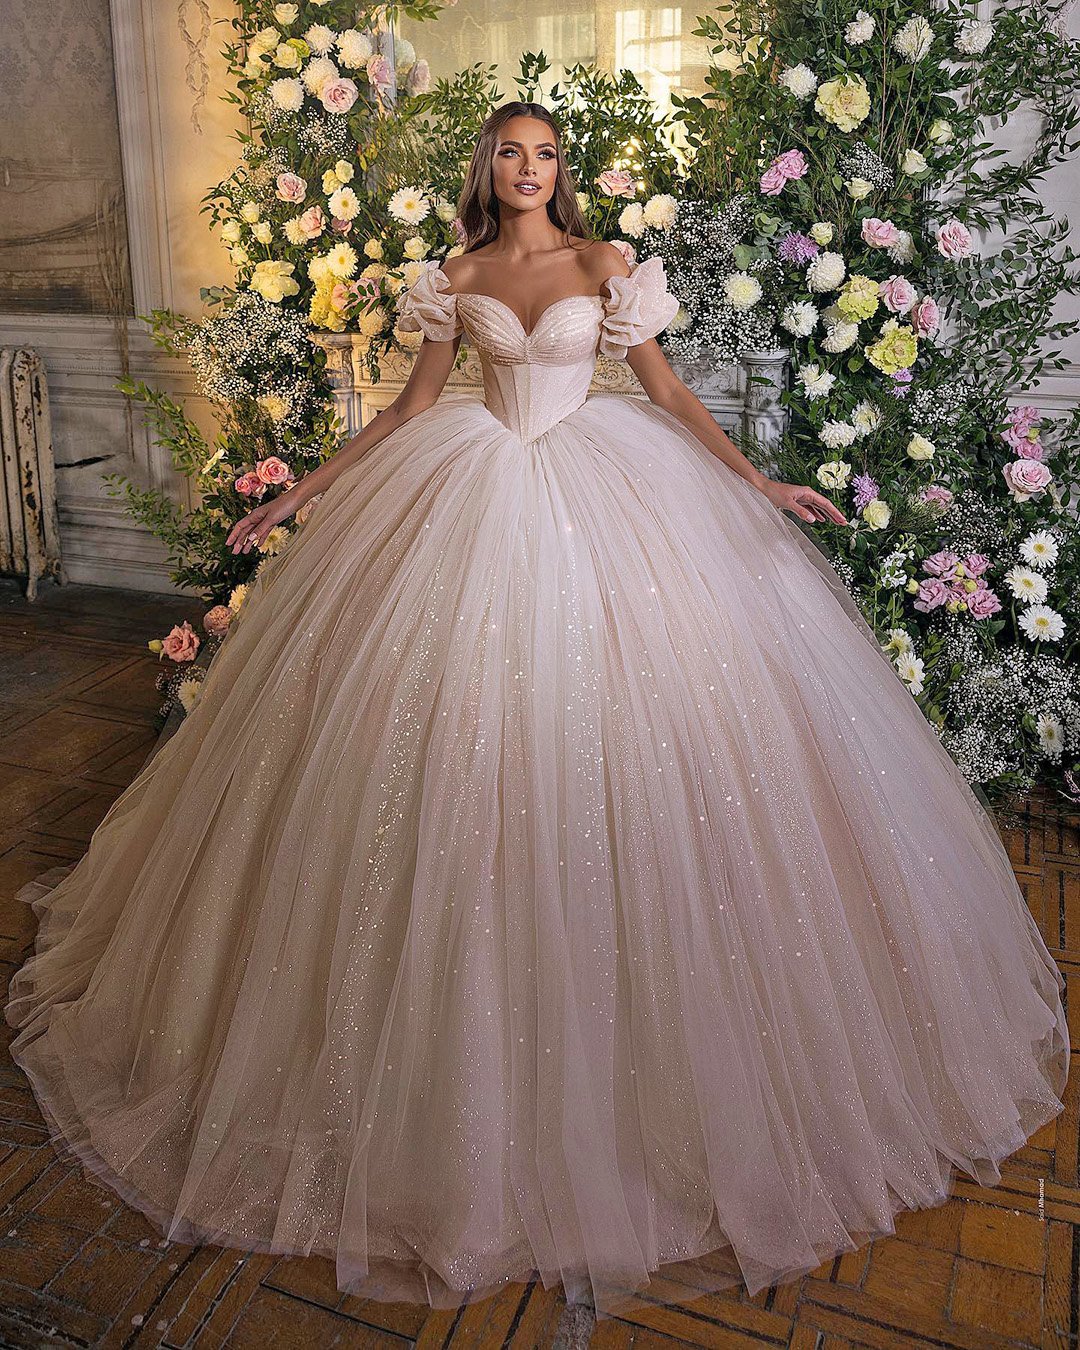 disney wedding dresses gown sweetheart neckline off the shoulder saidmhamad